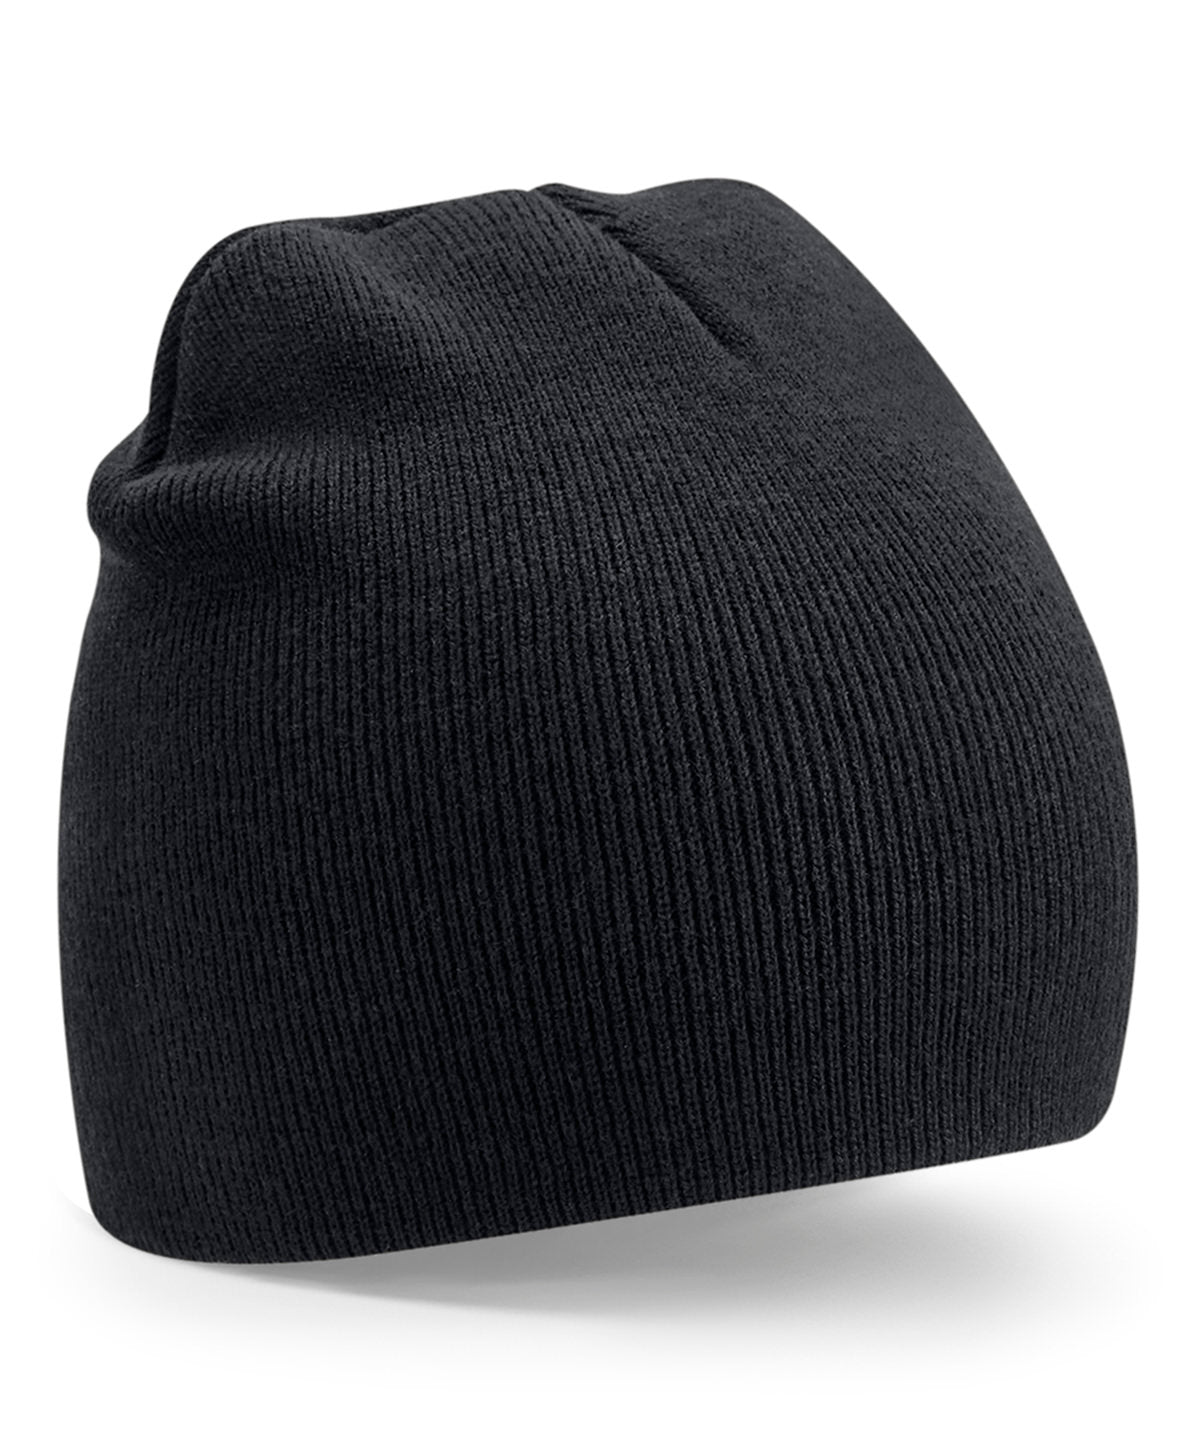 Personalised Hats - Black Beechfield Recycled original pull-on beanie